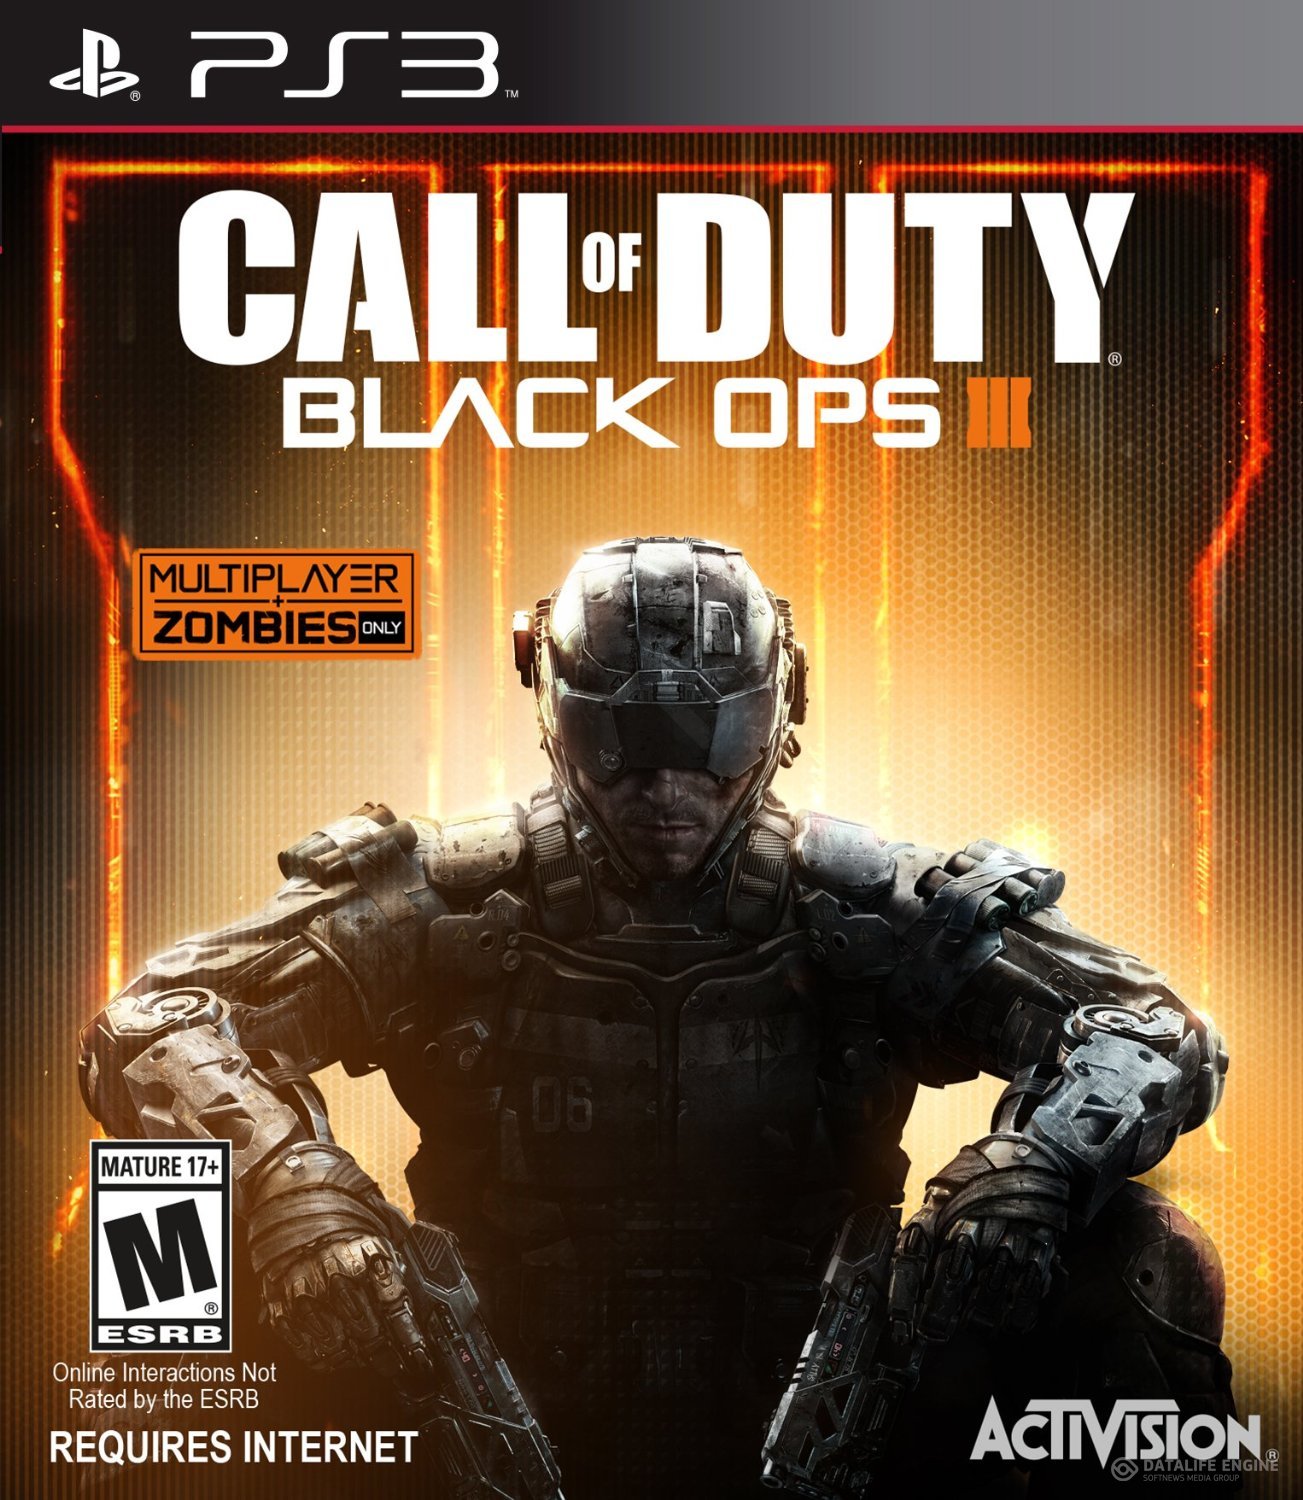 [PS3]Call of Duty: Black Ops 3 [EUR] 4.76 (Cobra ODE / E3 ODE PRO ISO)